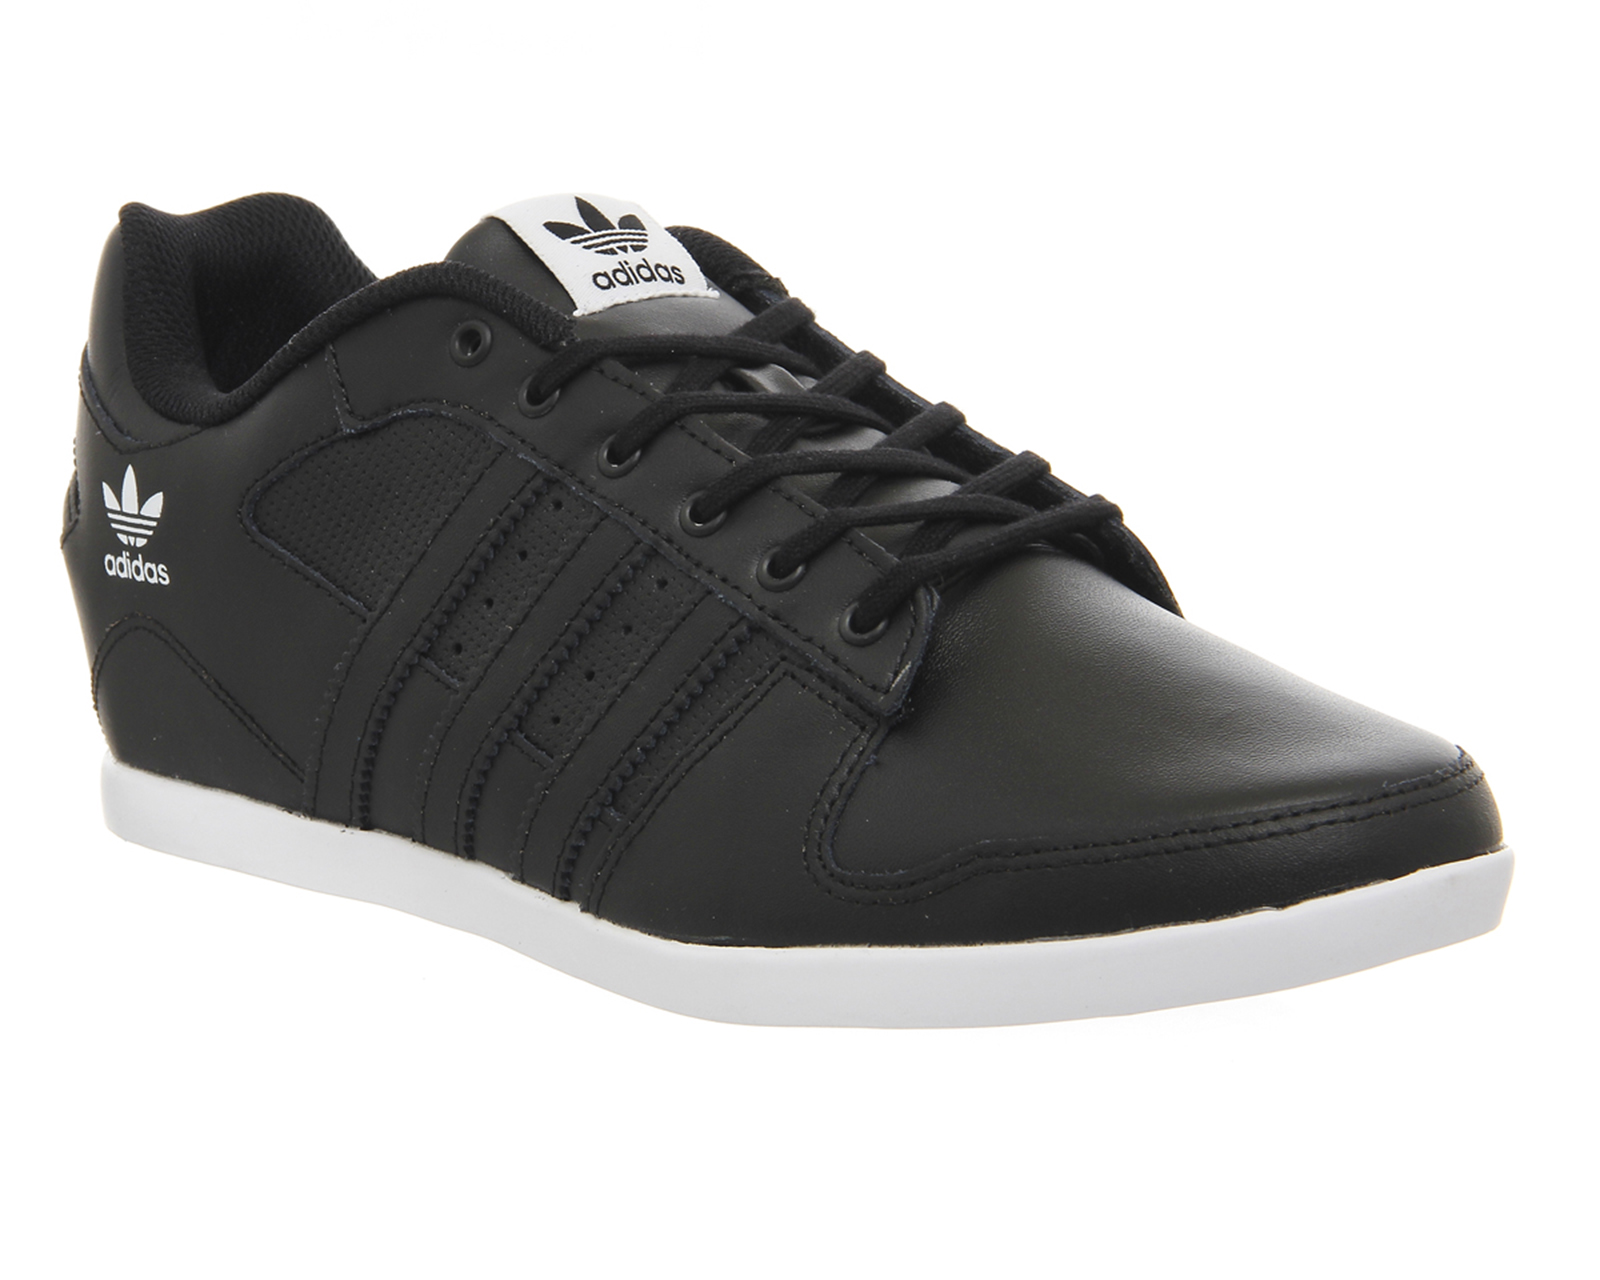 adidas Plimcana 2.0 Low Black White - His trainers